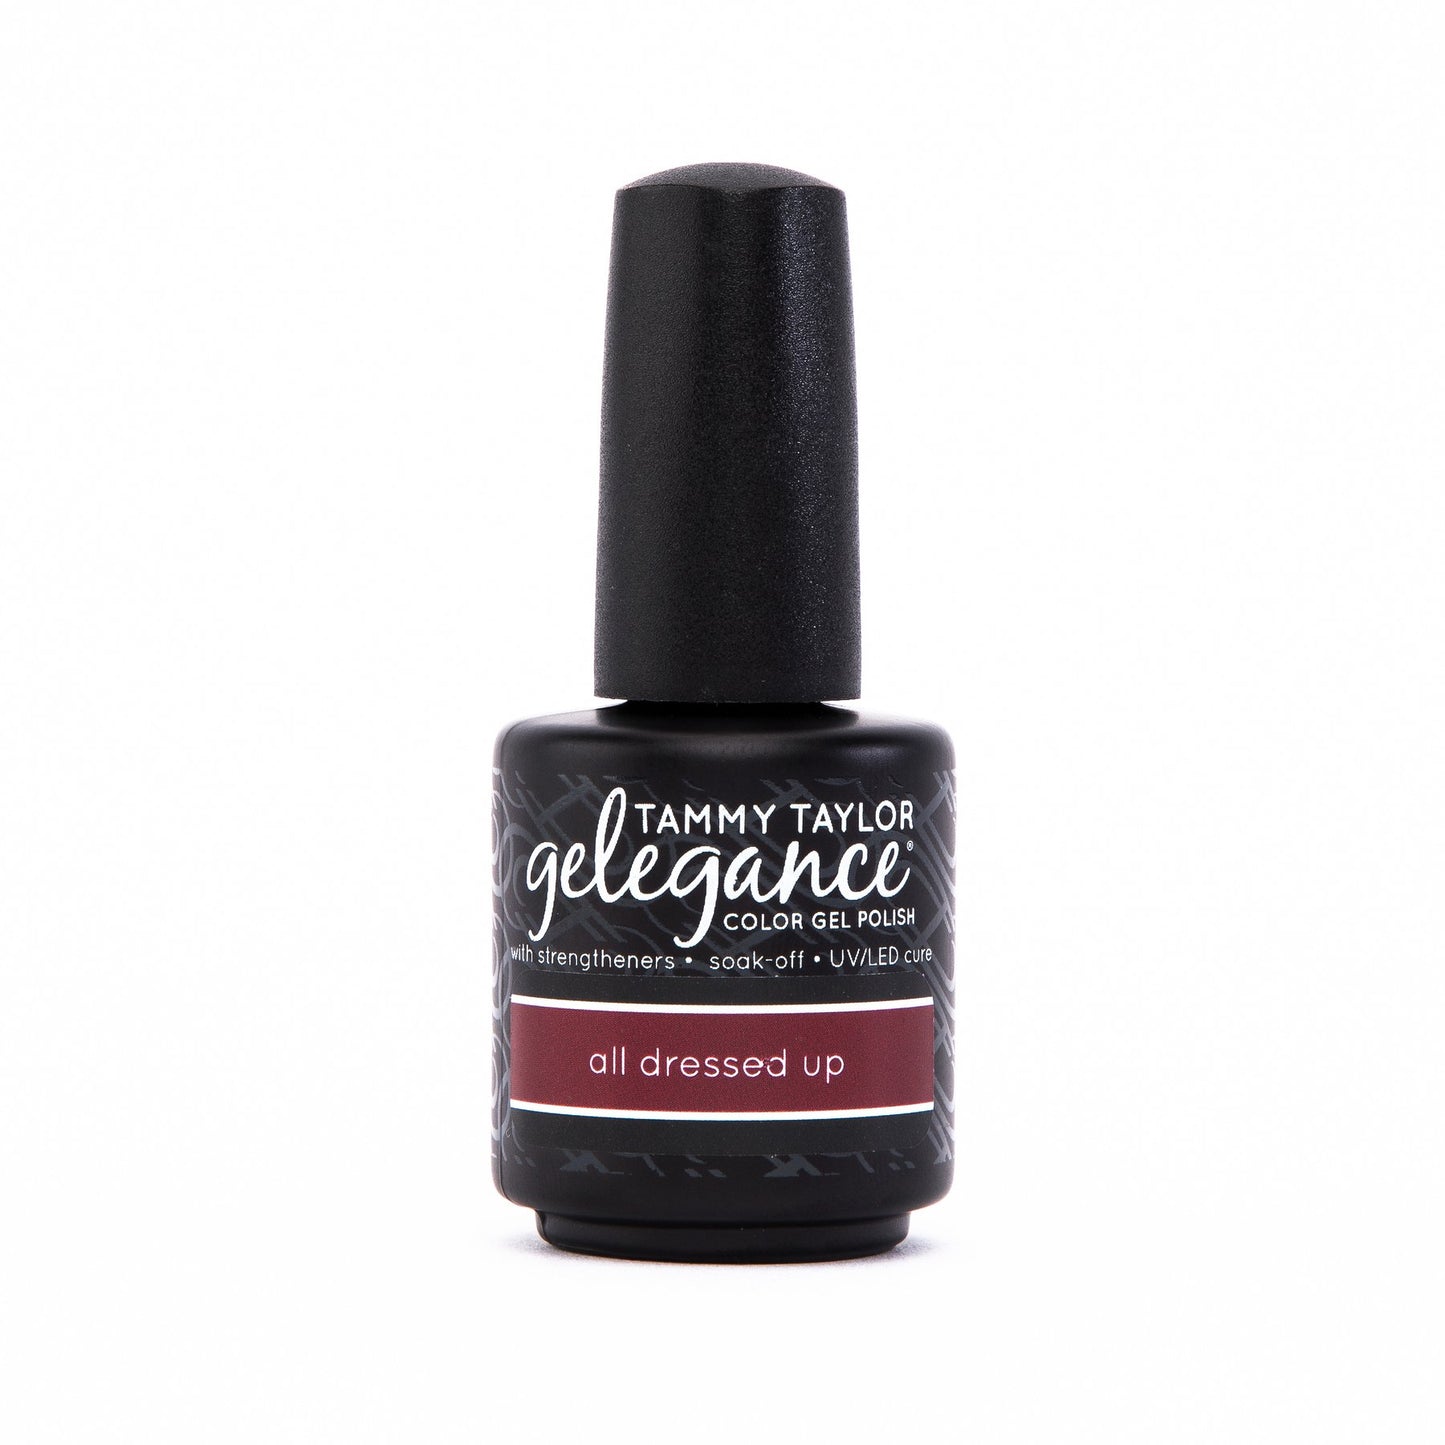 Tammy Taylor Nails - Manicure Pedicure Gelegance soak off gel Color - Free Domestic Shipping